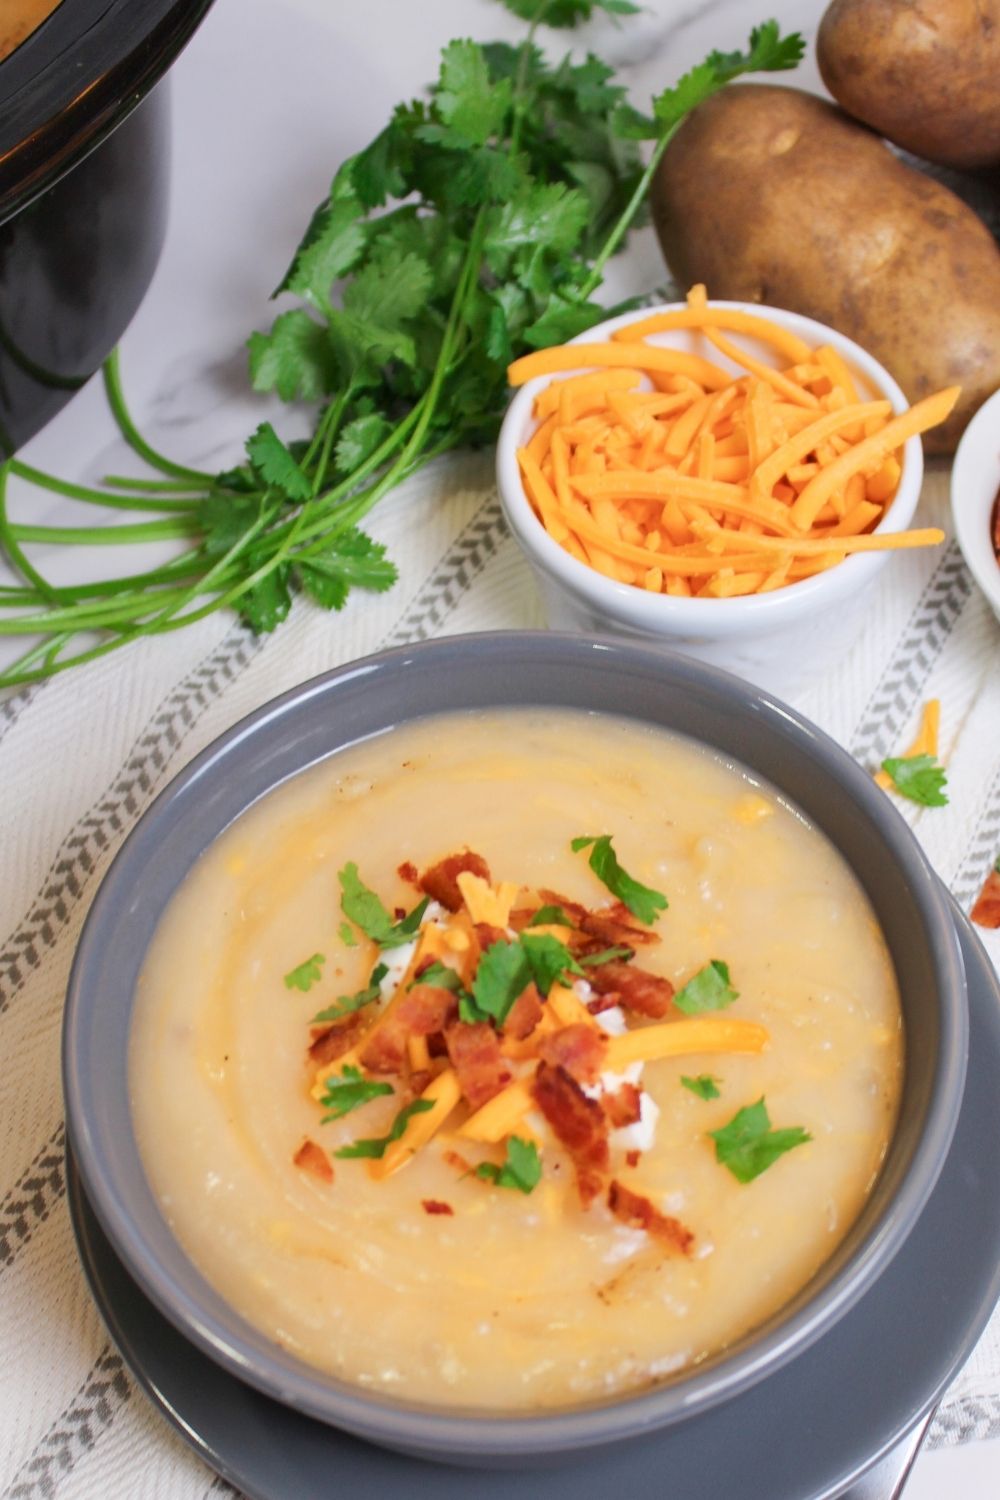 Weight Watchers potato soup served in a bowl